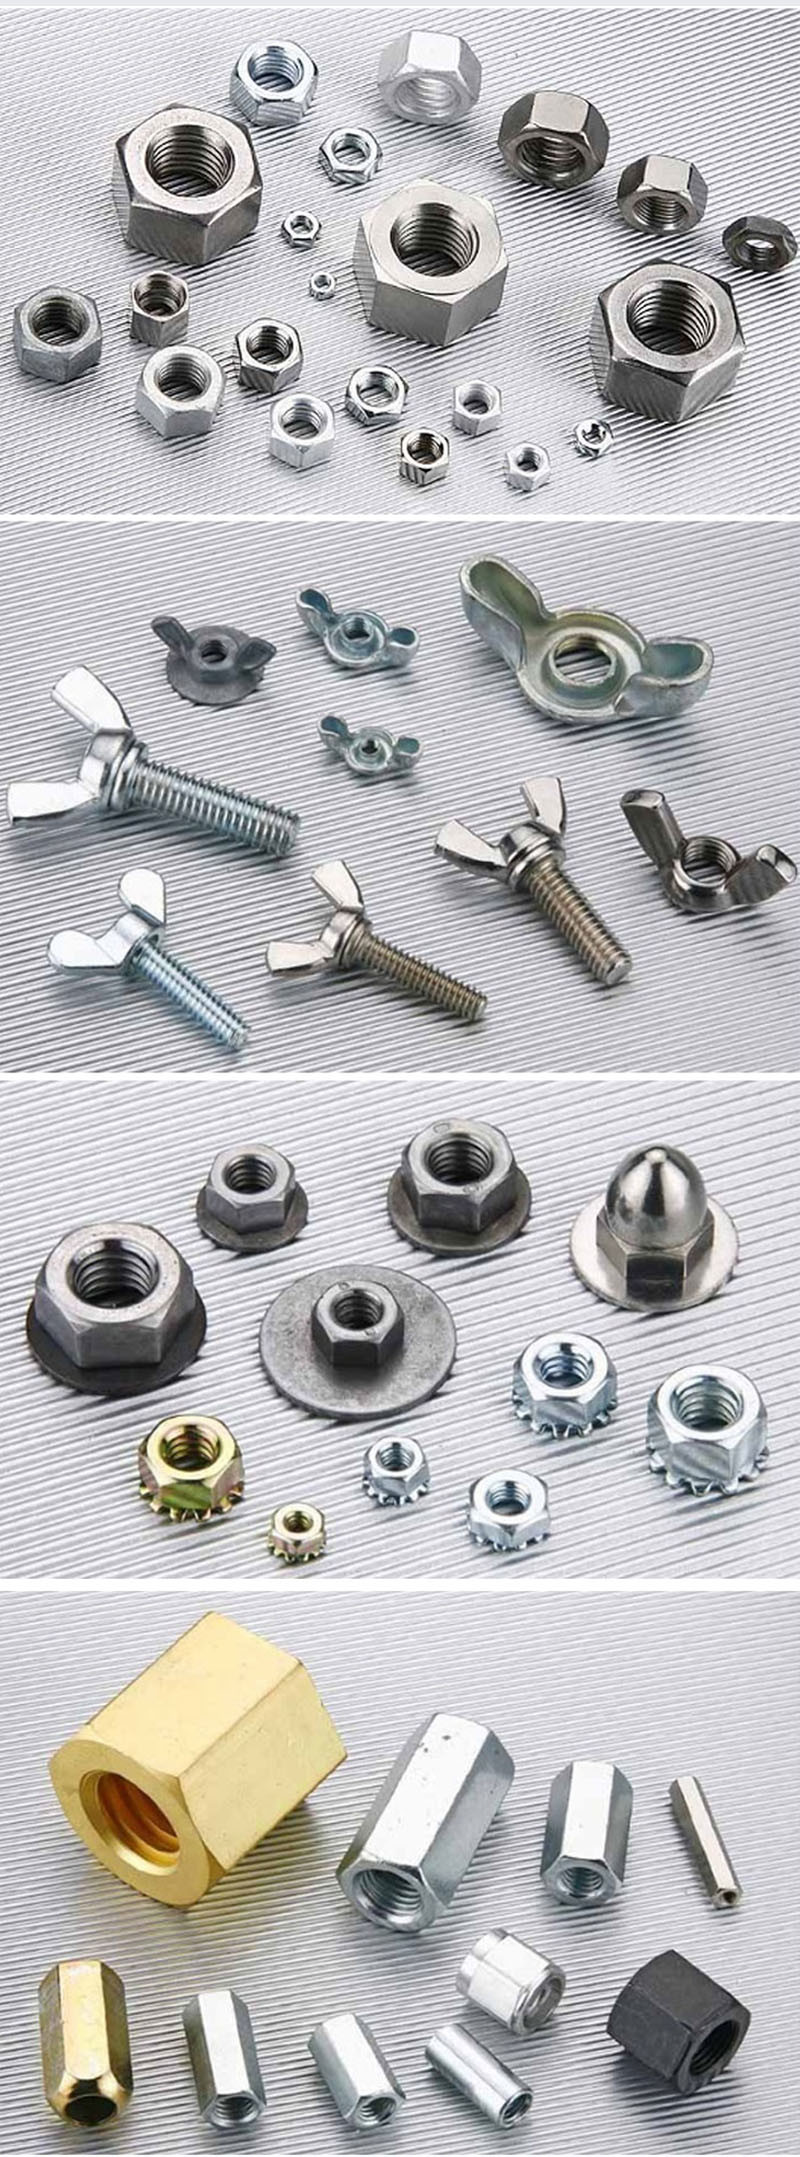 Cross Grooved Thread Cutting Tapping Anodized Bleed Screw